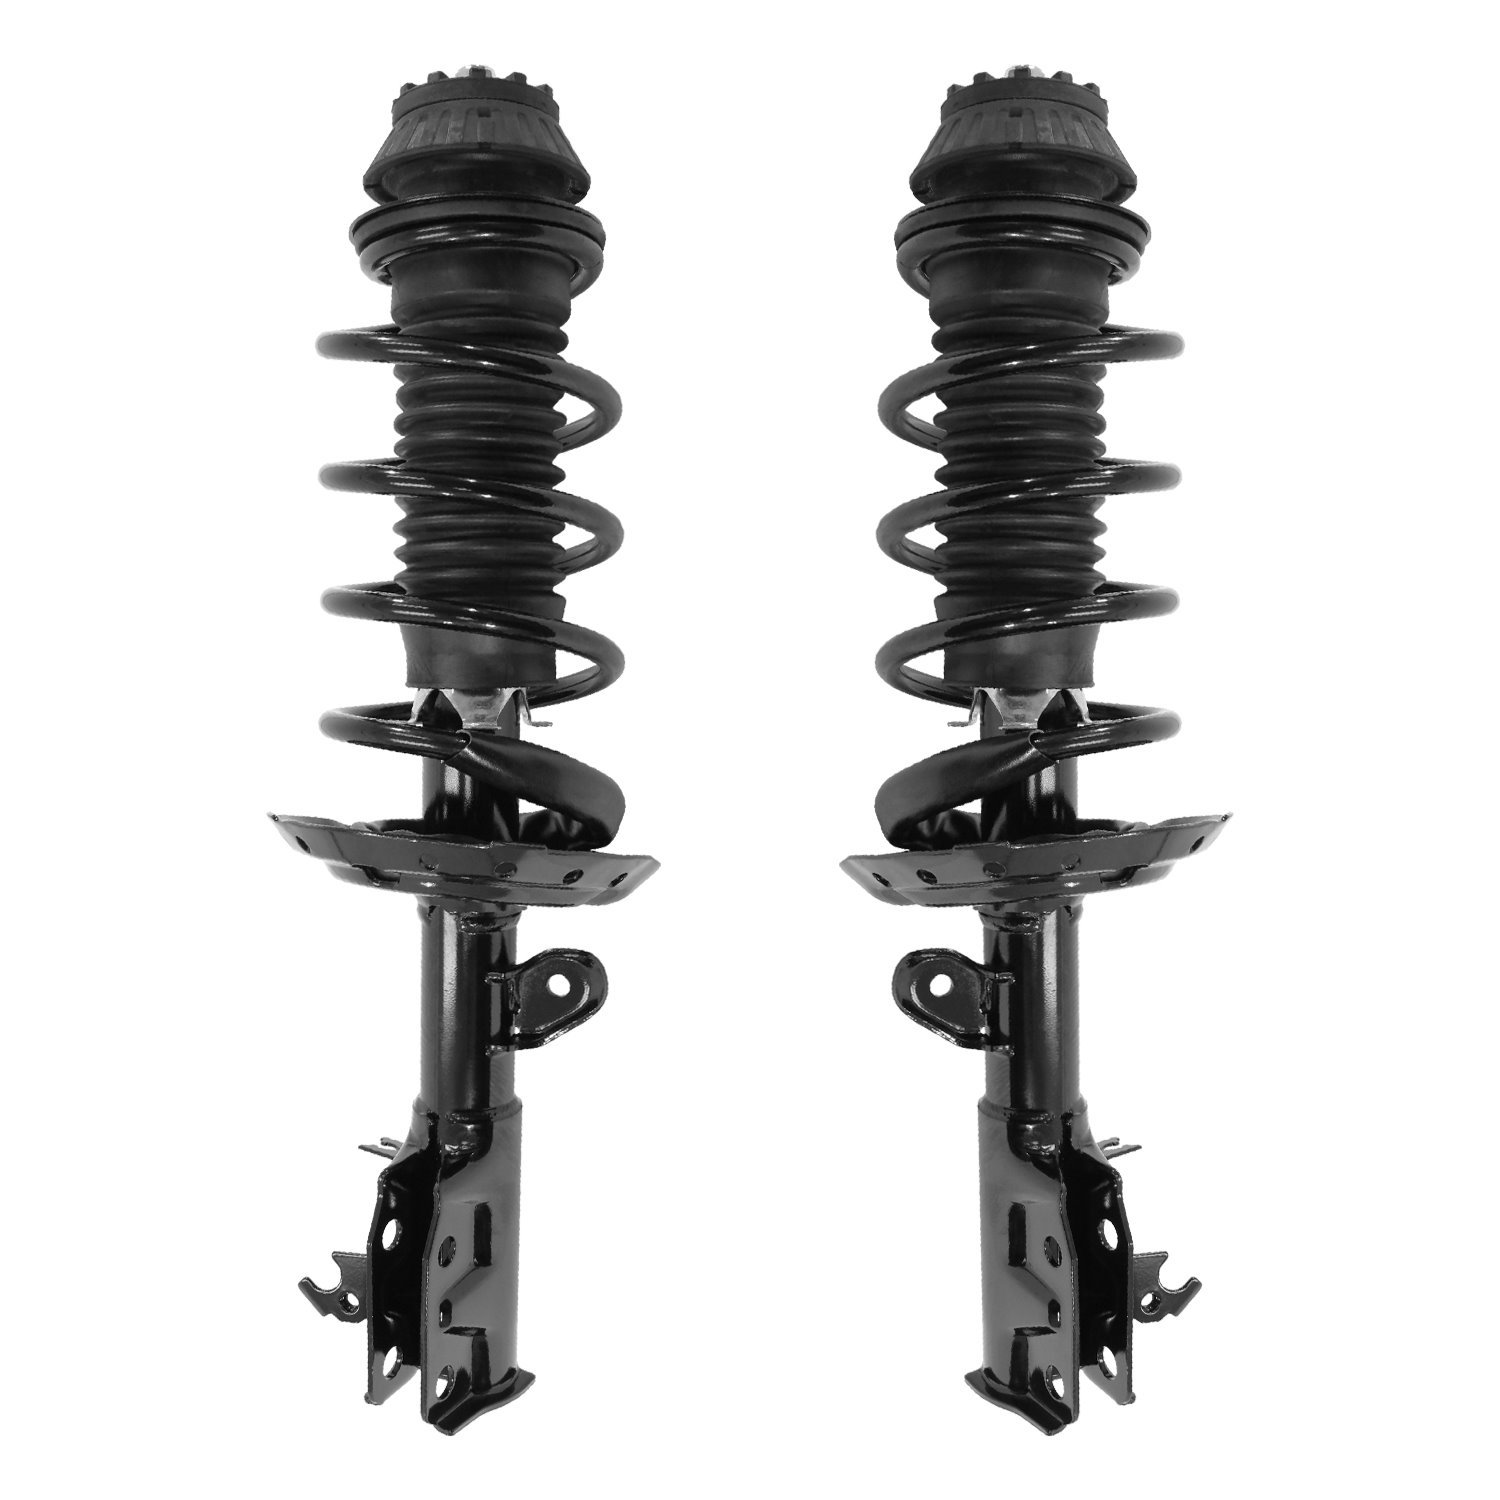 2-13391-13392-001 Front Suspension Strut & Coil Spring Assemby Set Fits Select Honda Fit